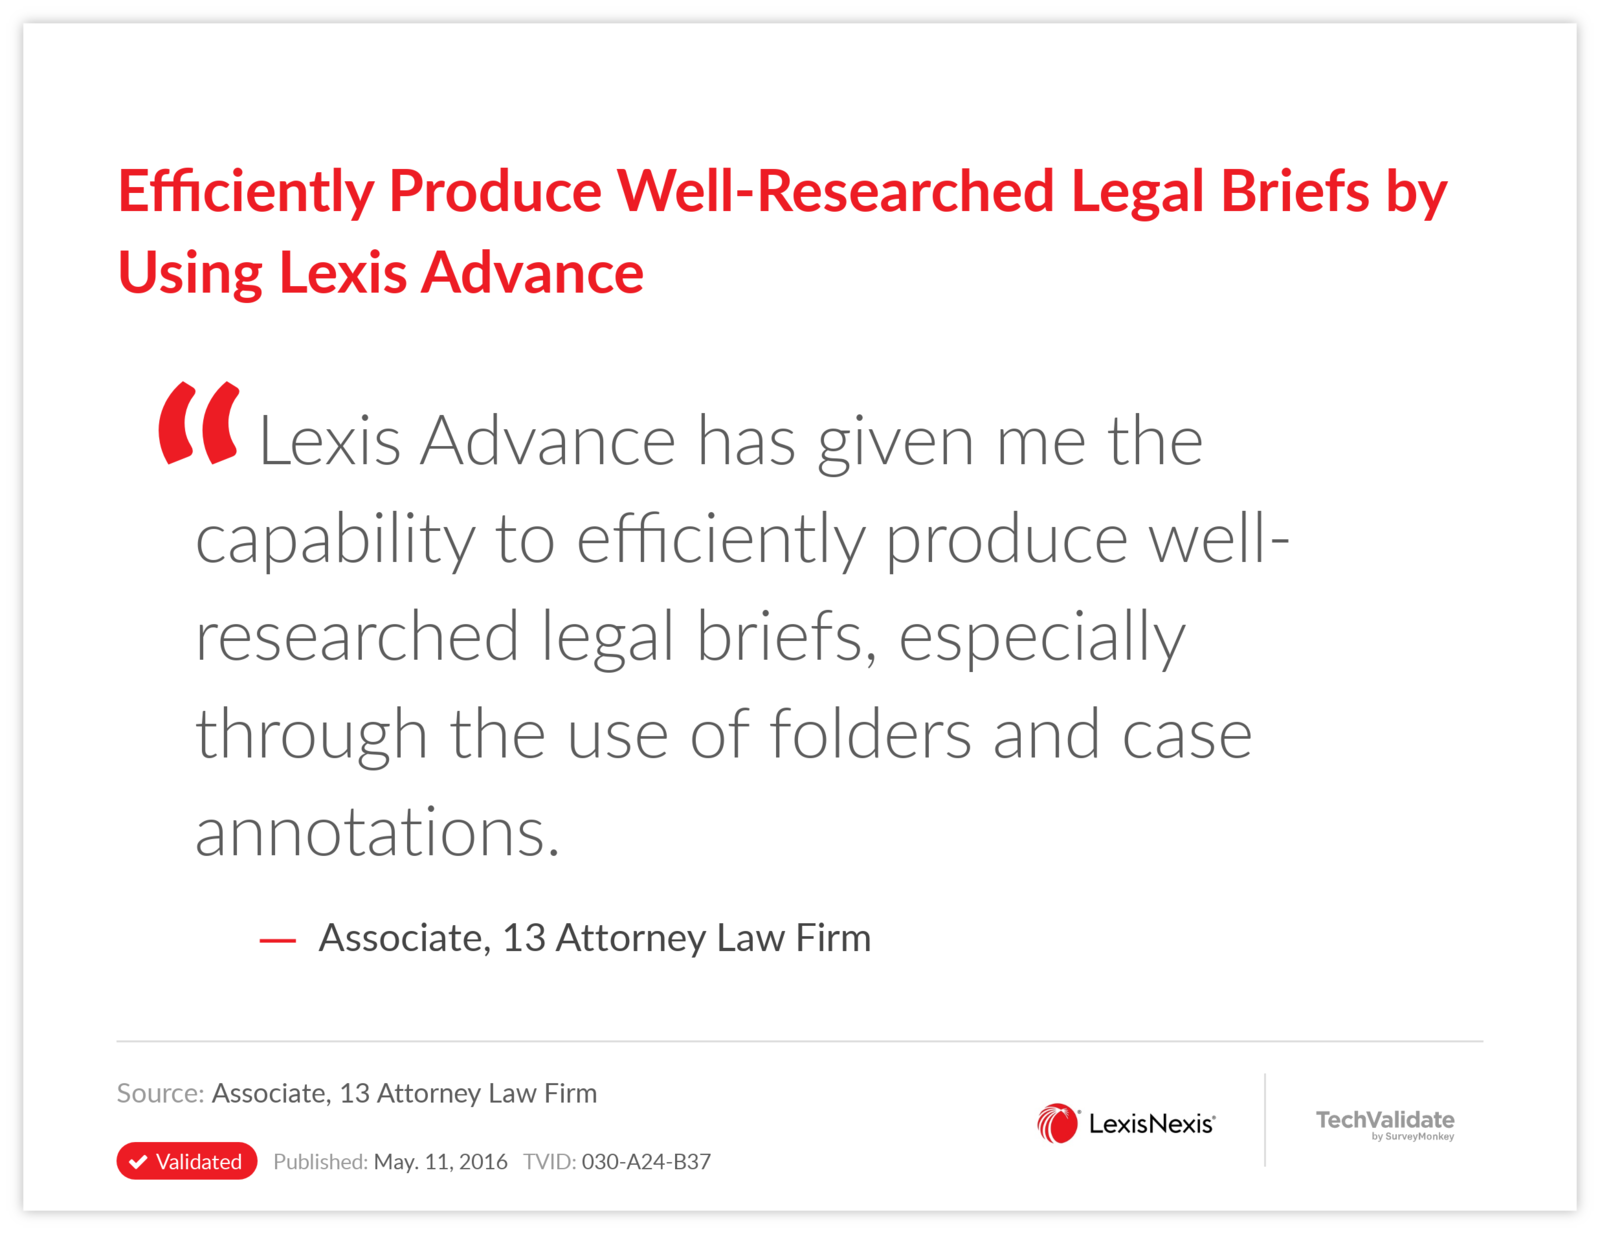 Efficiently Produce Well-Researched Legal Briefs by Using Lexis Advance